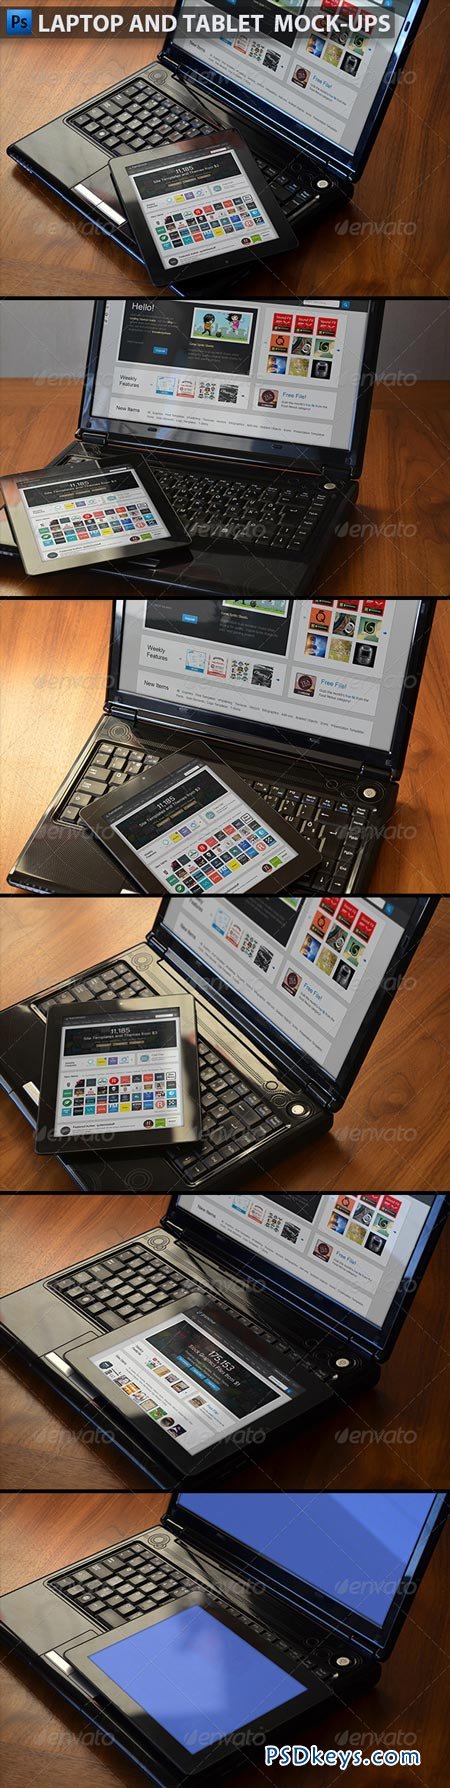 Laptop and Tablet Display Mock-Ups 6452762